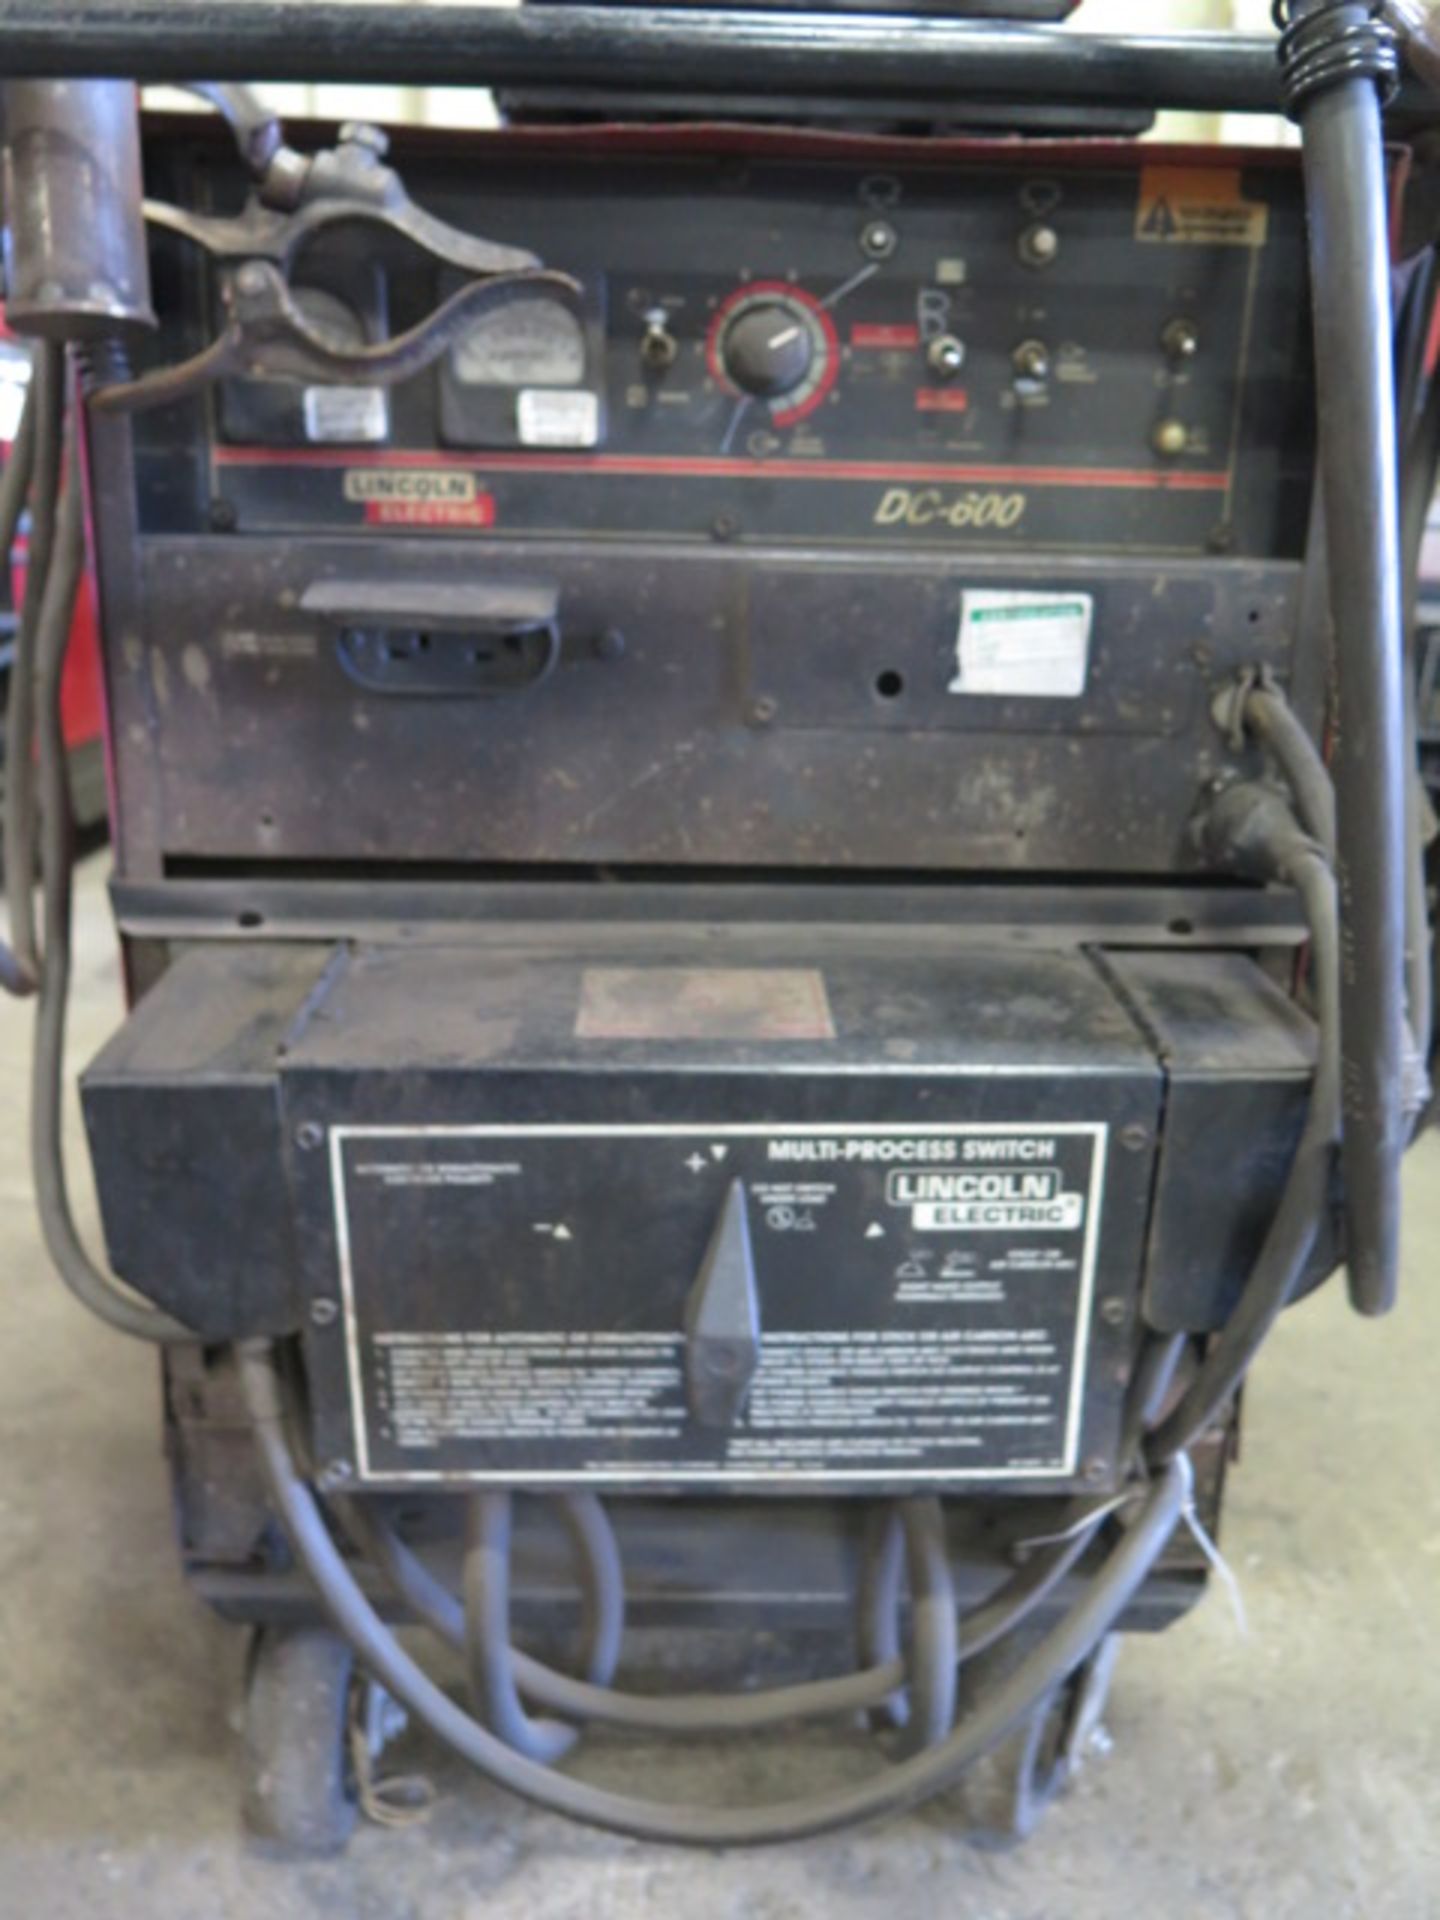 Lincoln DC-600 DC Arc Welding Power Source s/n U1020802421 w/ Lincoln Multi-Process Switch, - Image 6 of 7